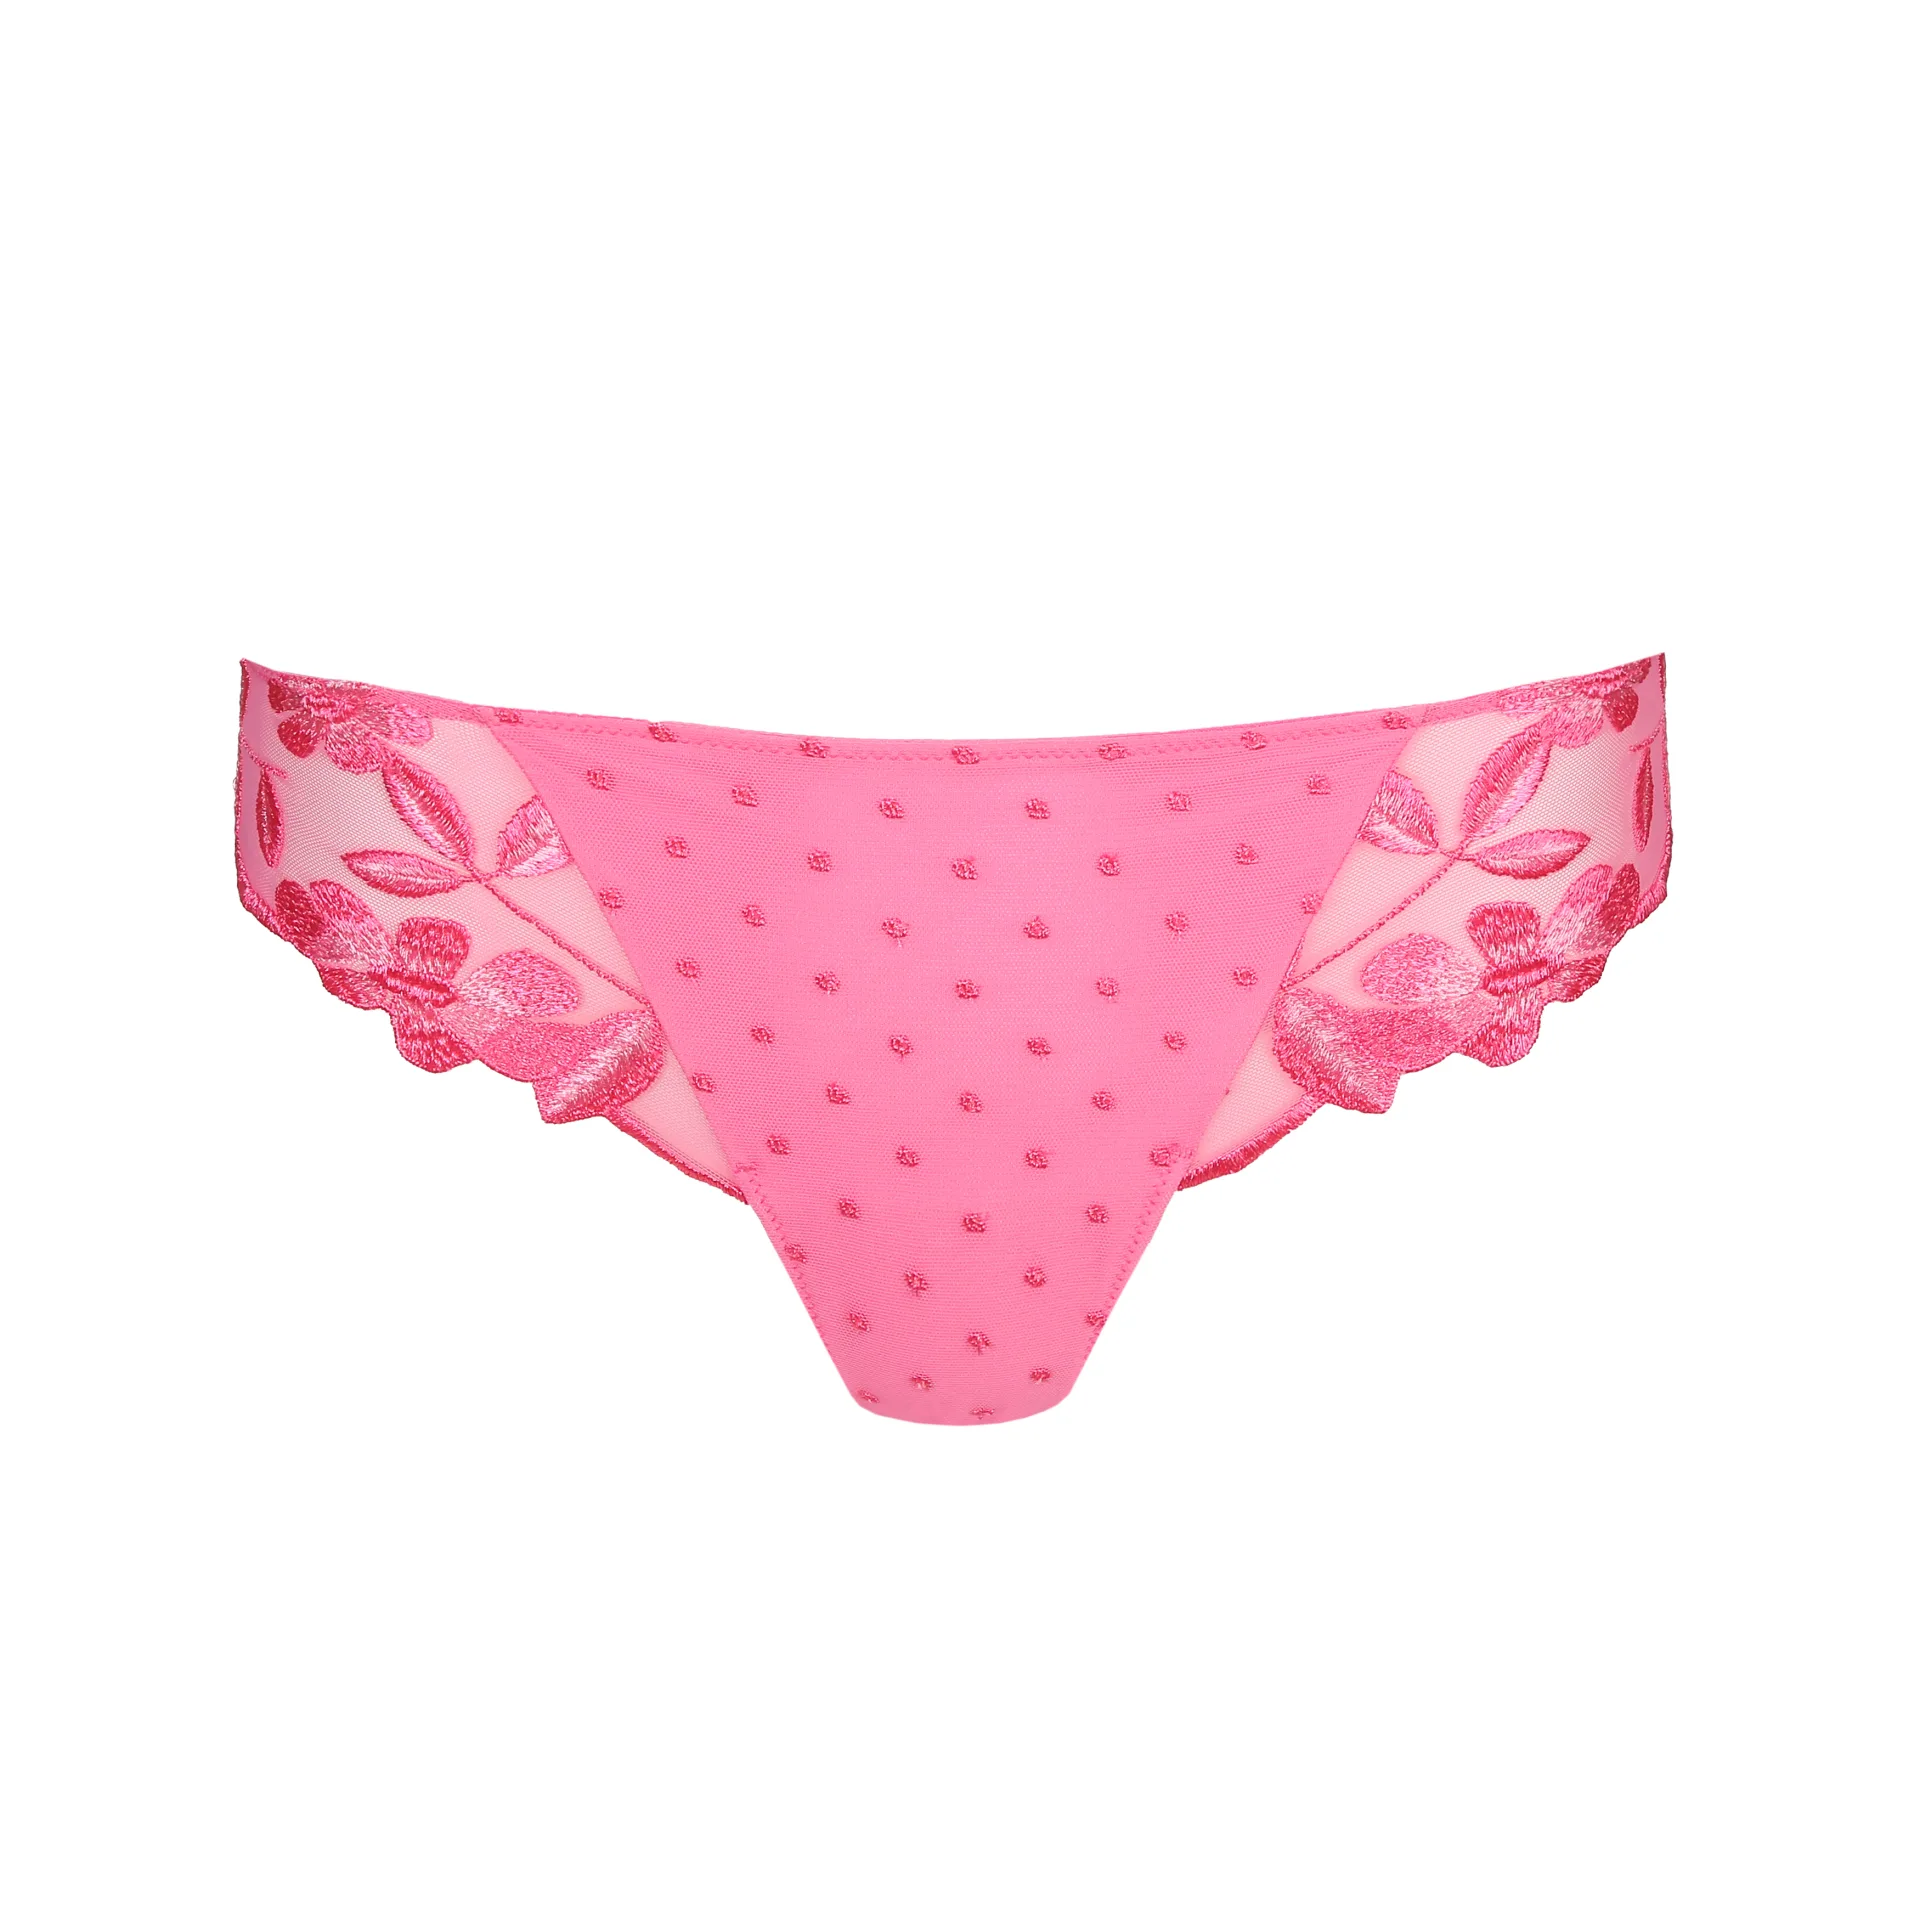 Marie Jo Agnes Paradise Pink Thong Marie Jo United States